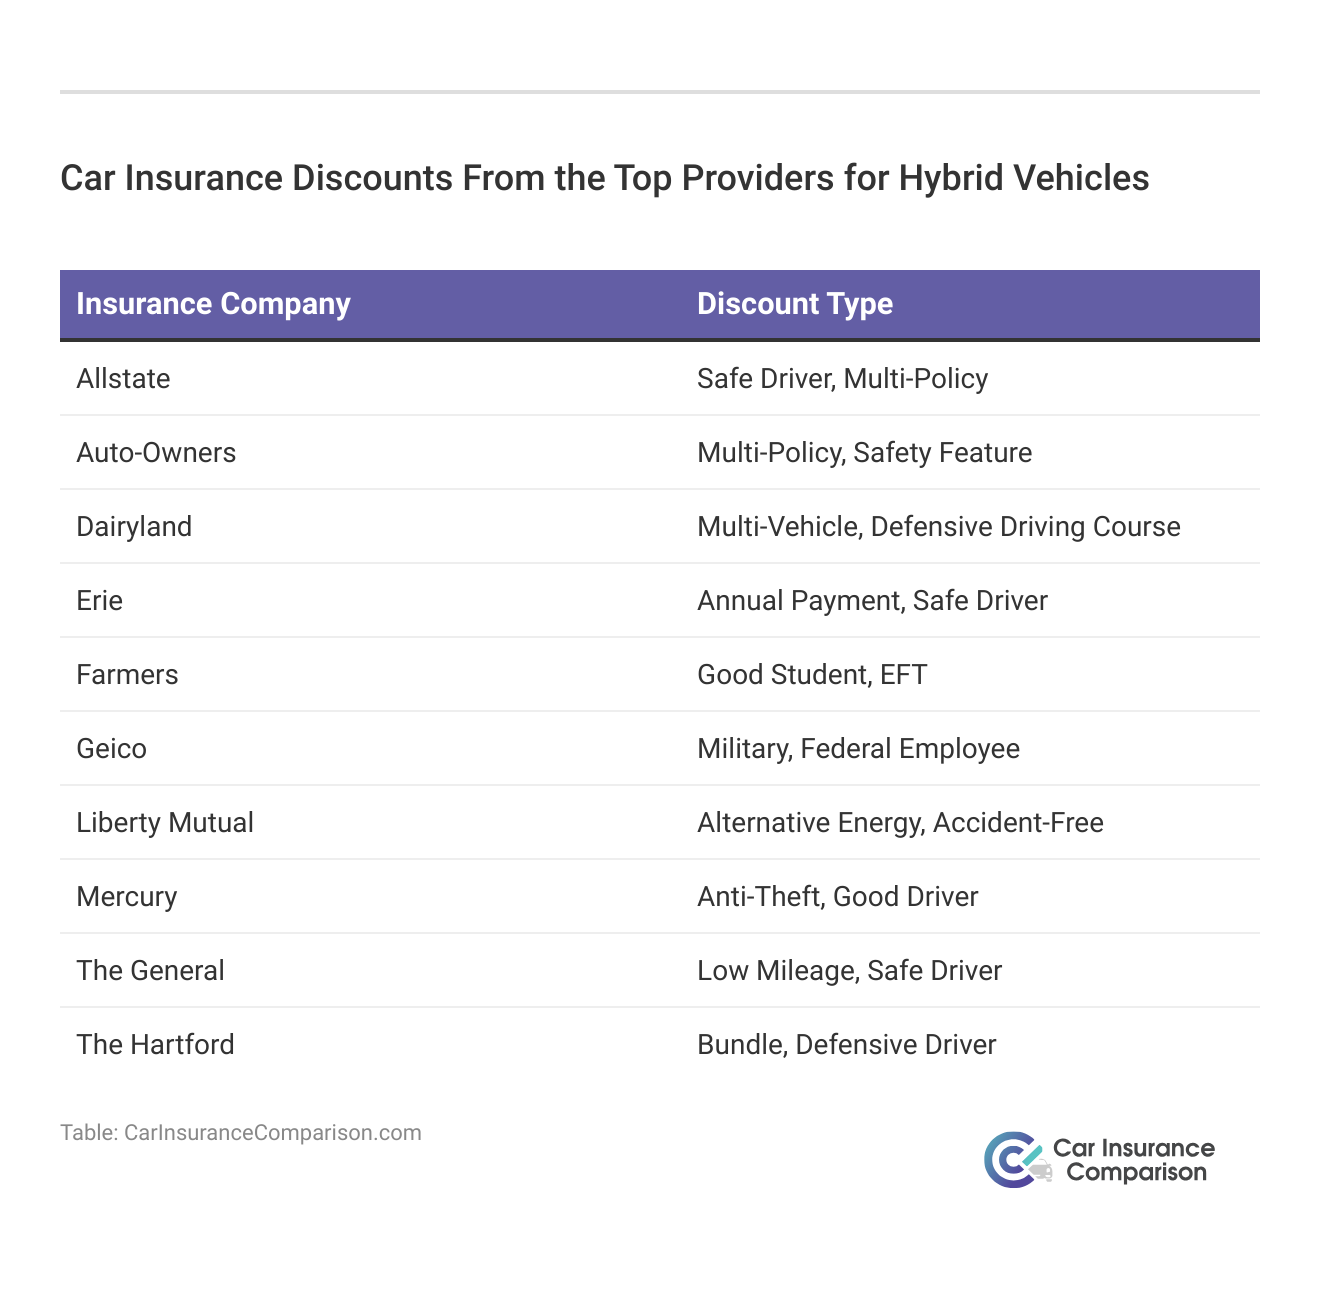 <h3>Car Insurance Discounts From the Top Providers for Hybrid Vehicles</h3>